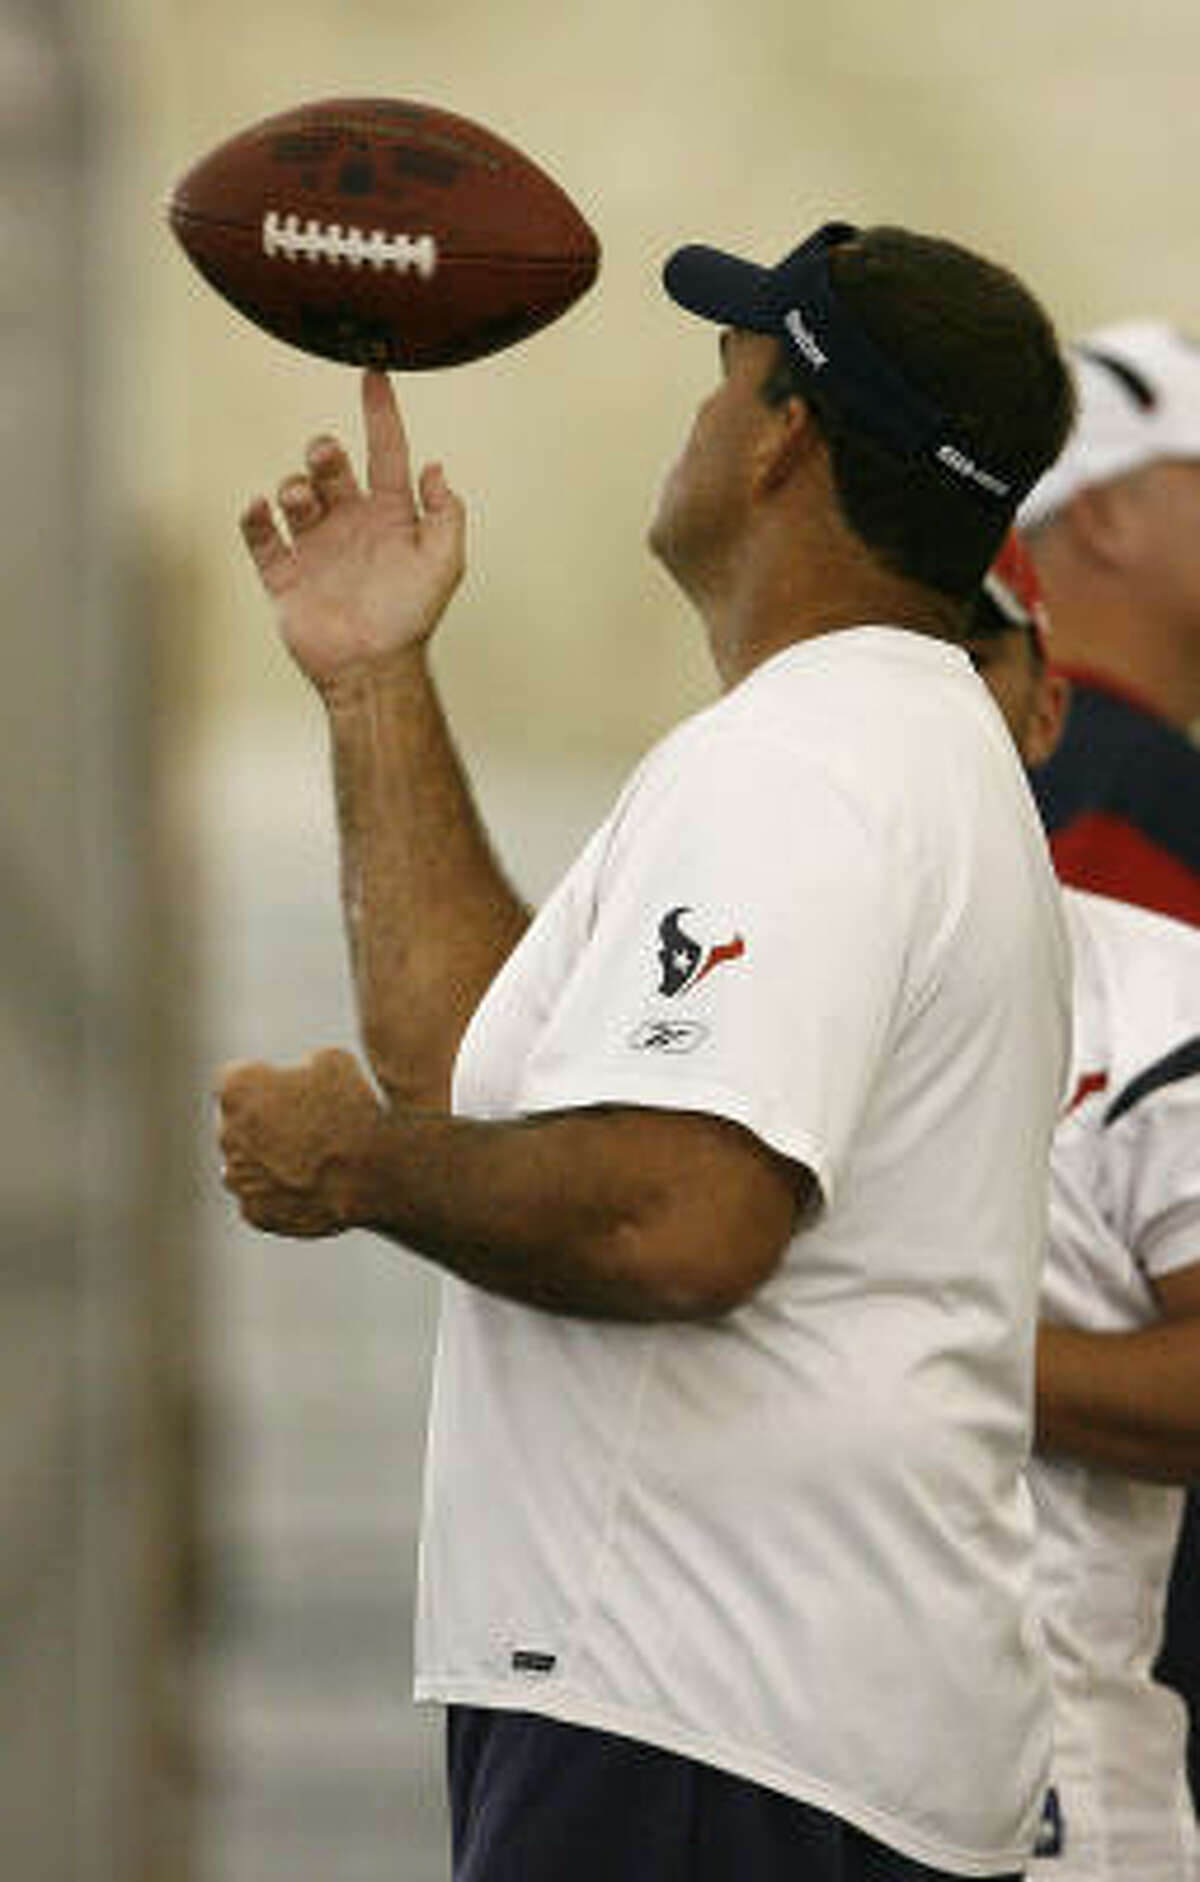 Bruce Matthews served as an offensive assistant for the Texans during the afternoon session of the team's training camp.